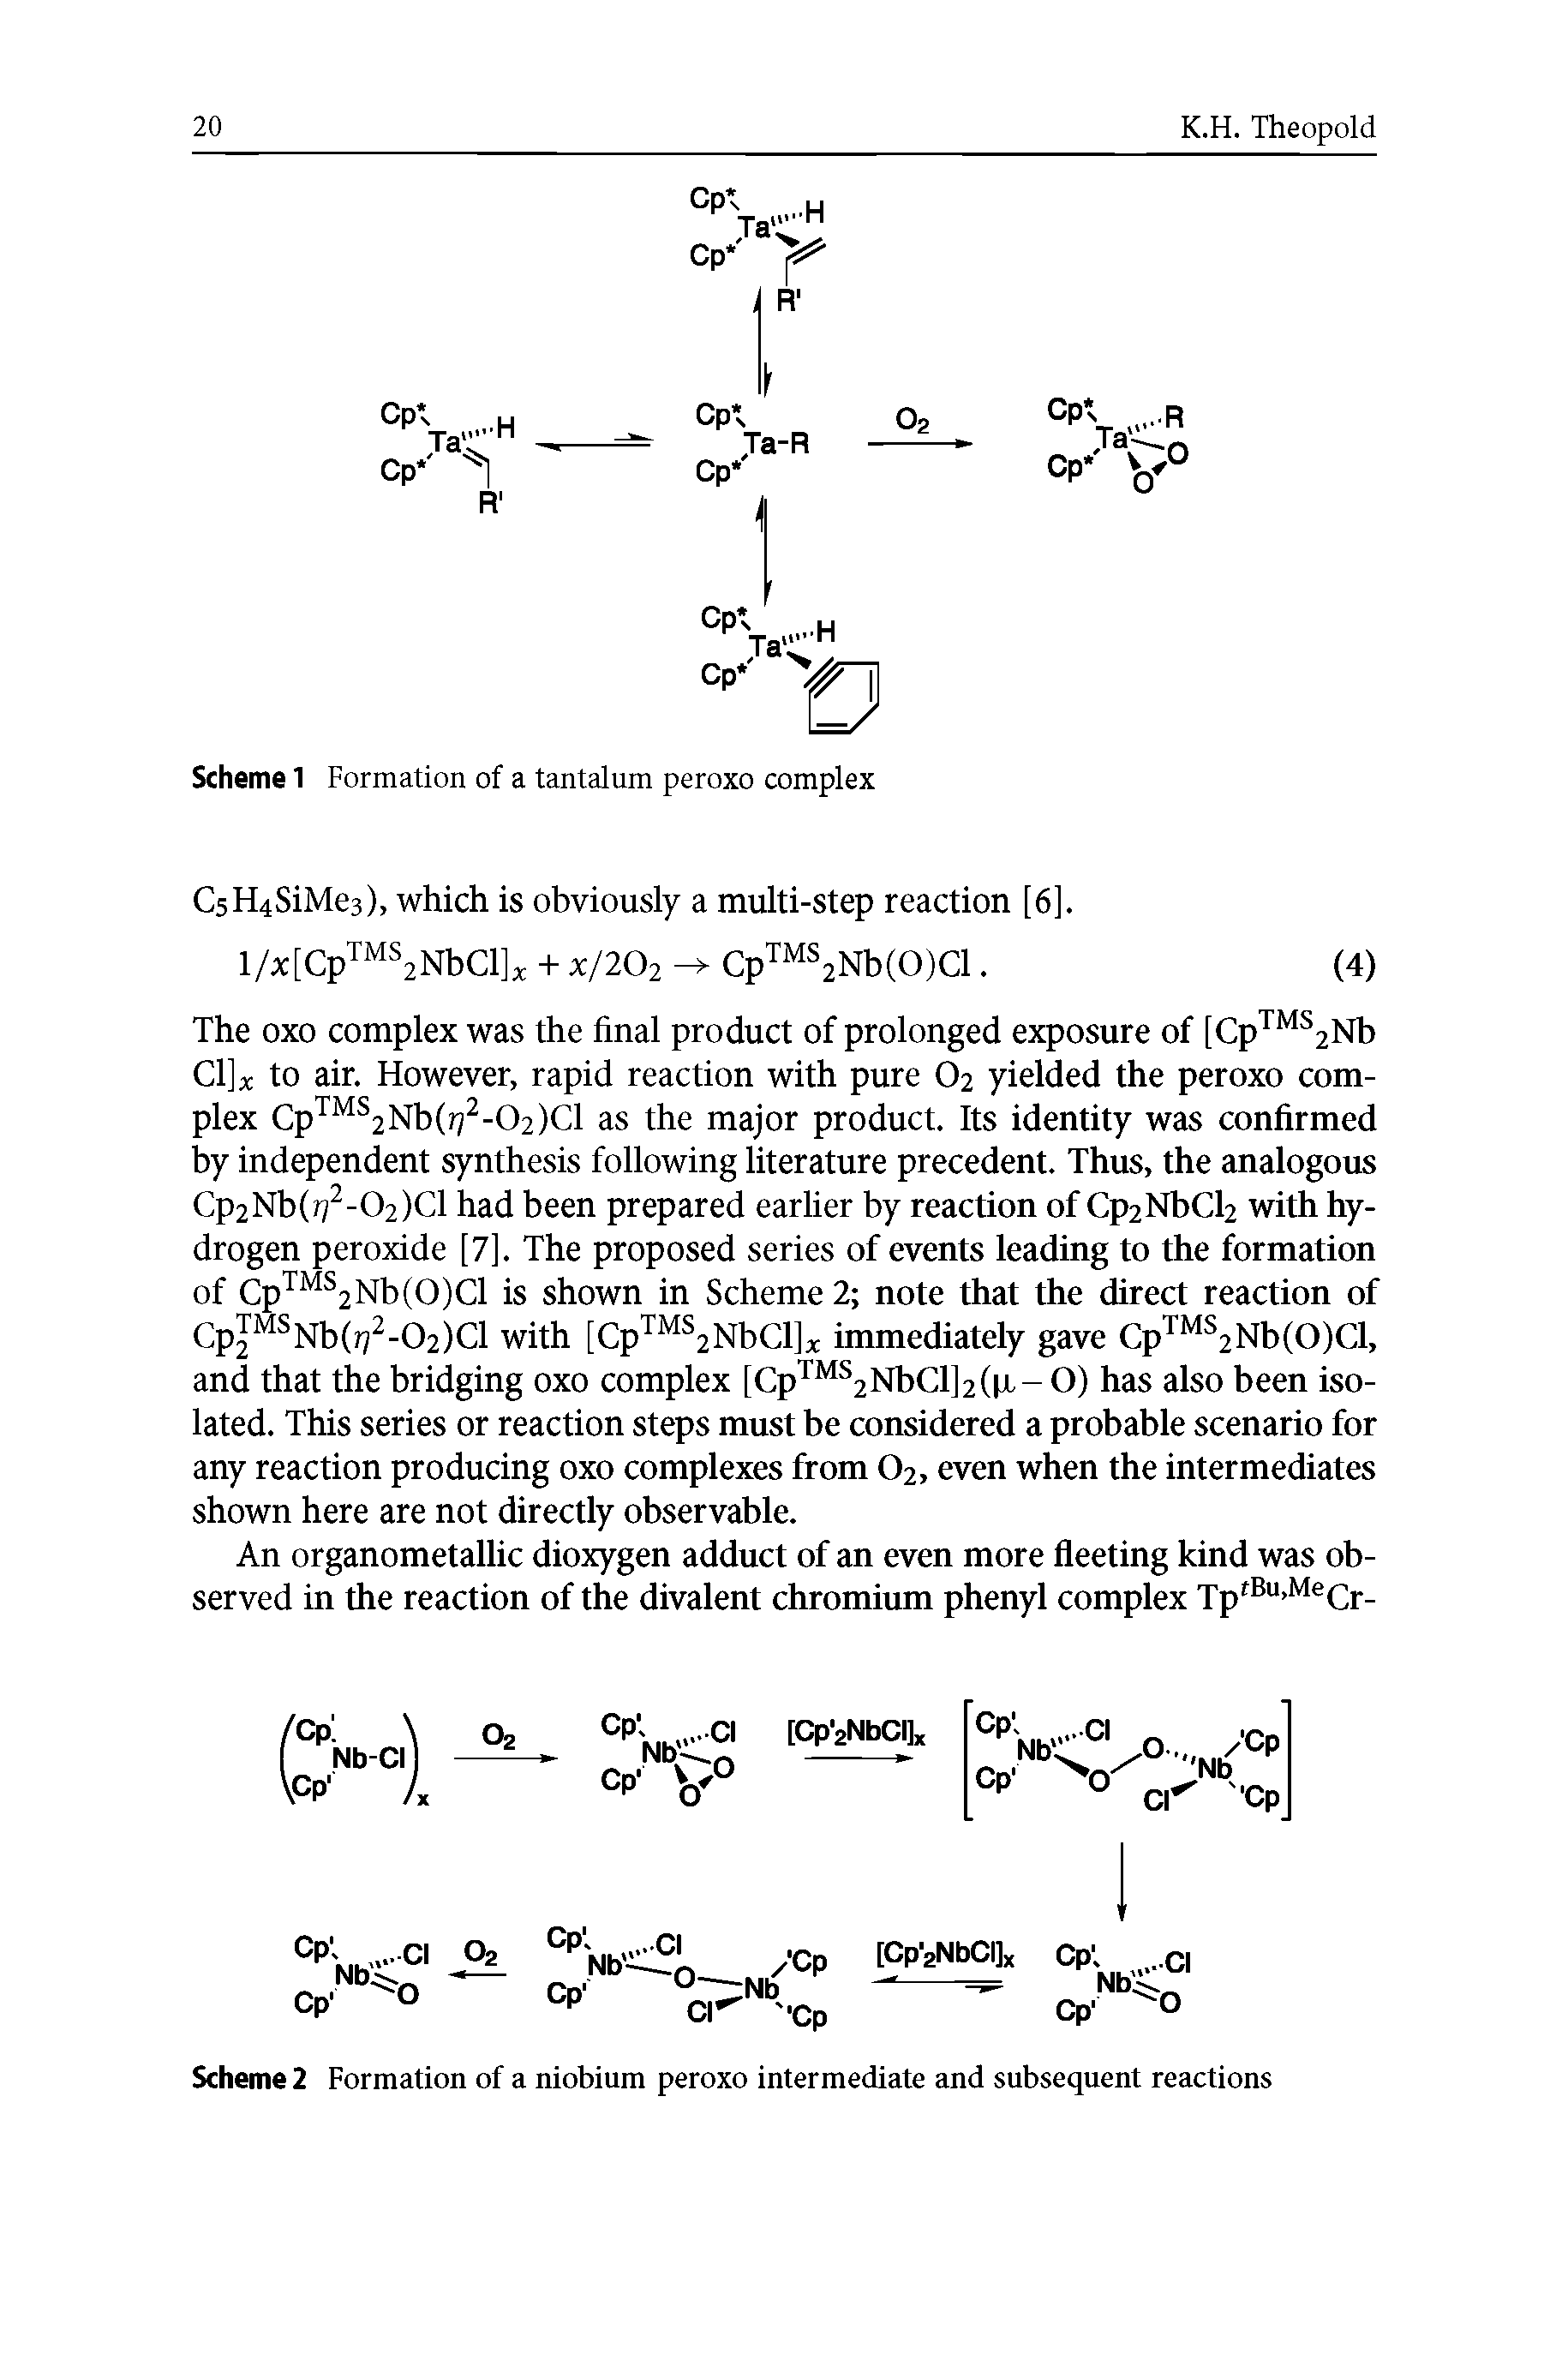 Scheme 2 Formation of a niobium peroxo intermediate and subsequent reactions...